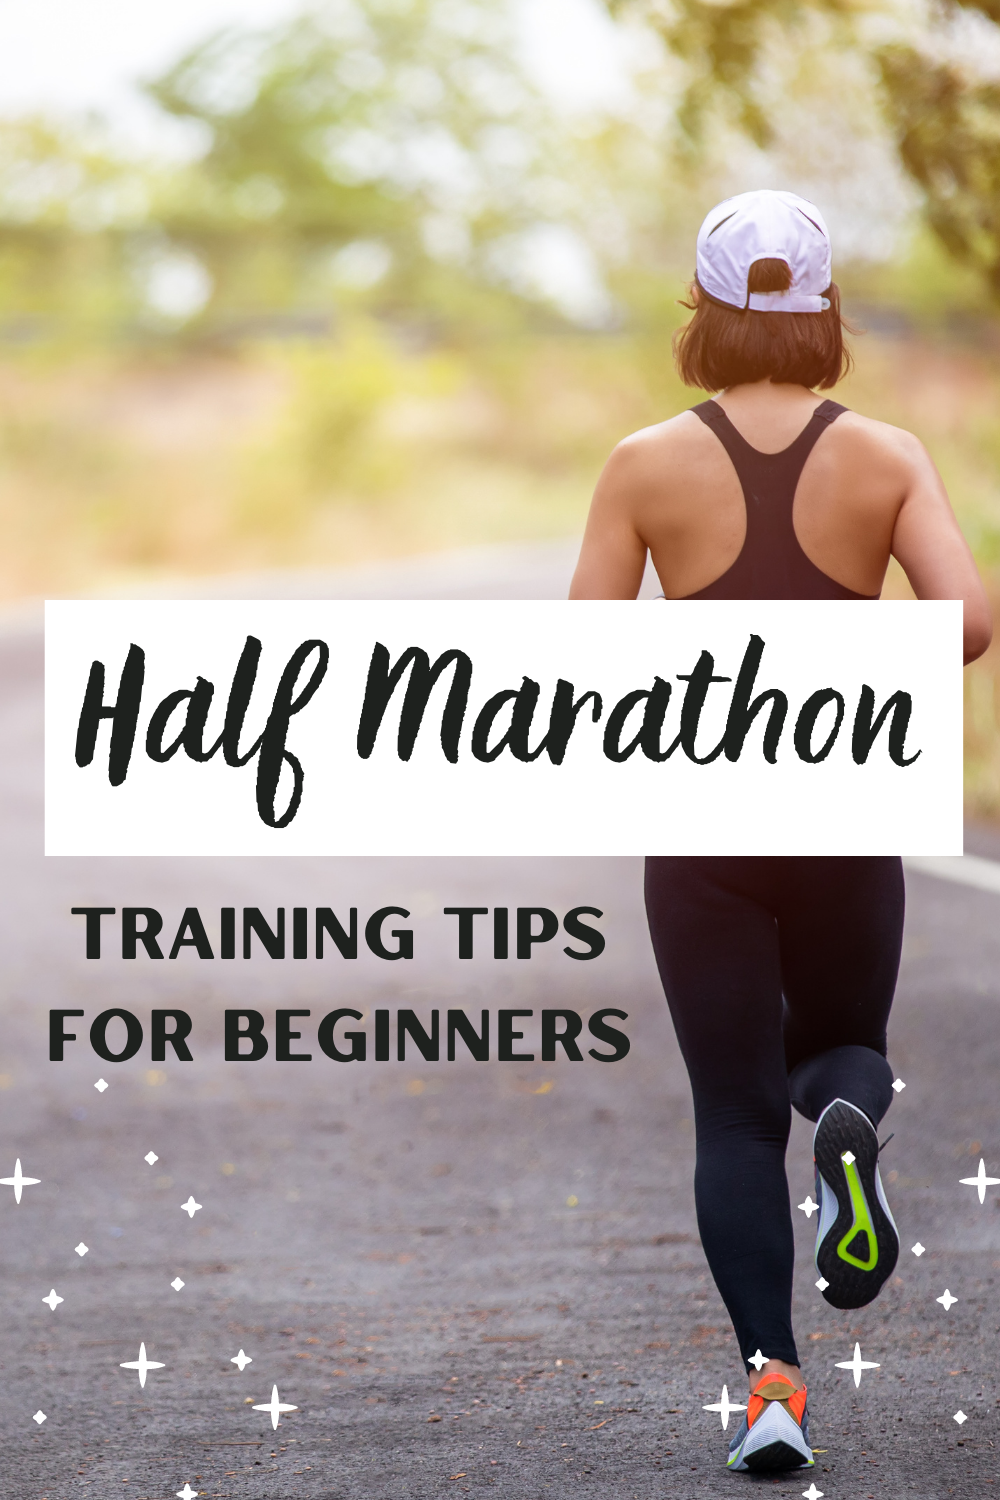 I have never really been a runner, but decided one day that I wanted to start running and my goal was to complete a half marathon. After 10 weeks of training, not only did I complete my first half marathon, but I signed up for three more! Check out this post for all of my half marathon training tips for beginners.